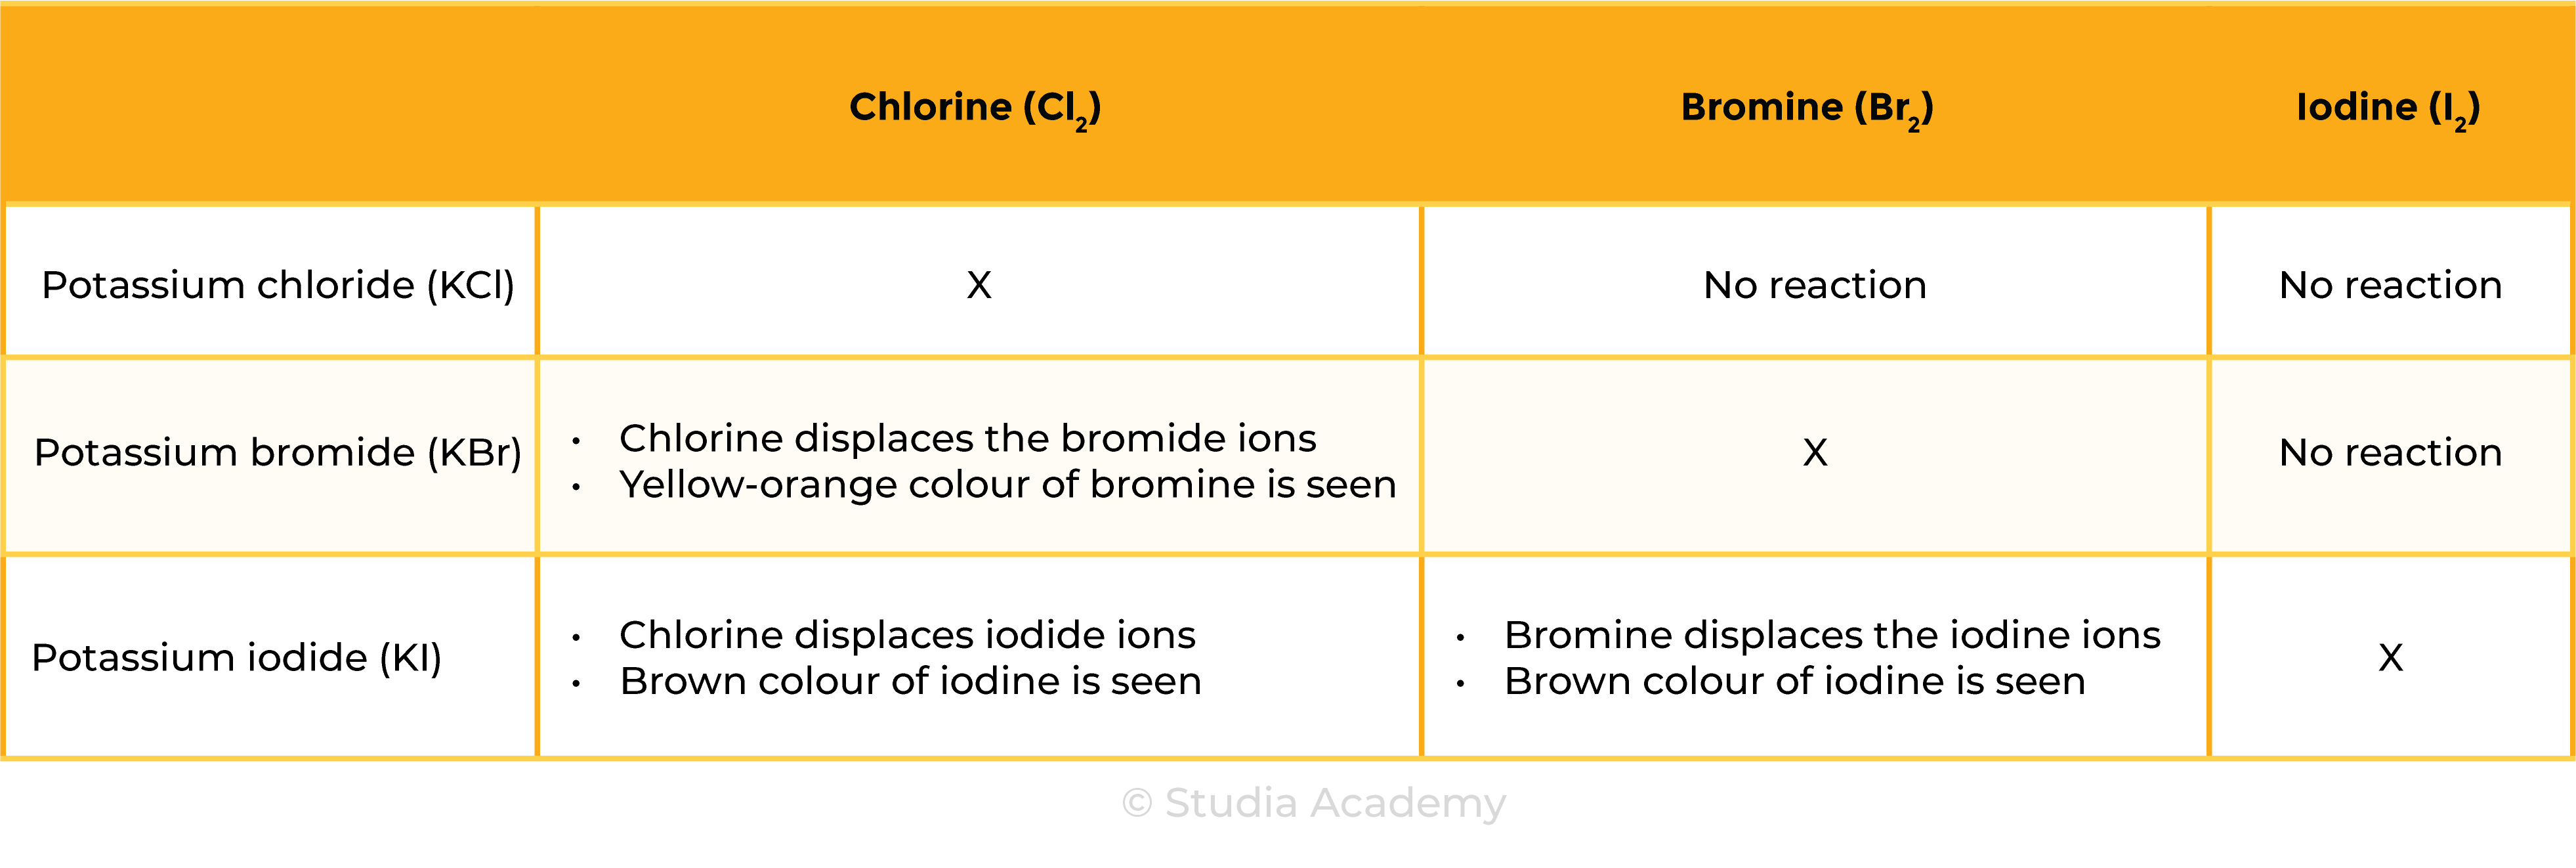 edexcel_igcse_chemistry_topic 11 tables_group 7 (halogens) chlorine, bromine, and iodine_002_halogens displacement reactions